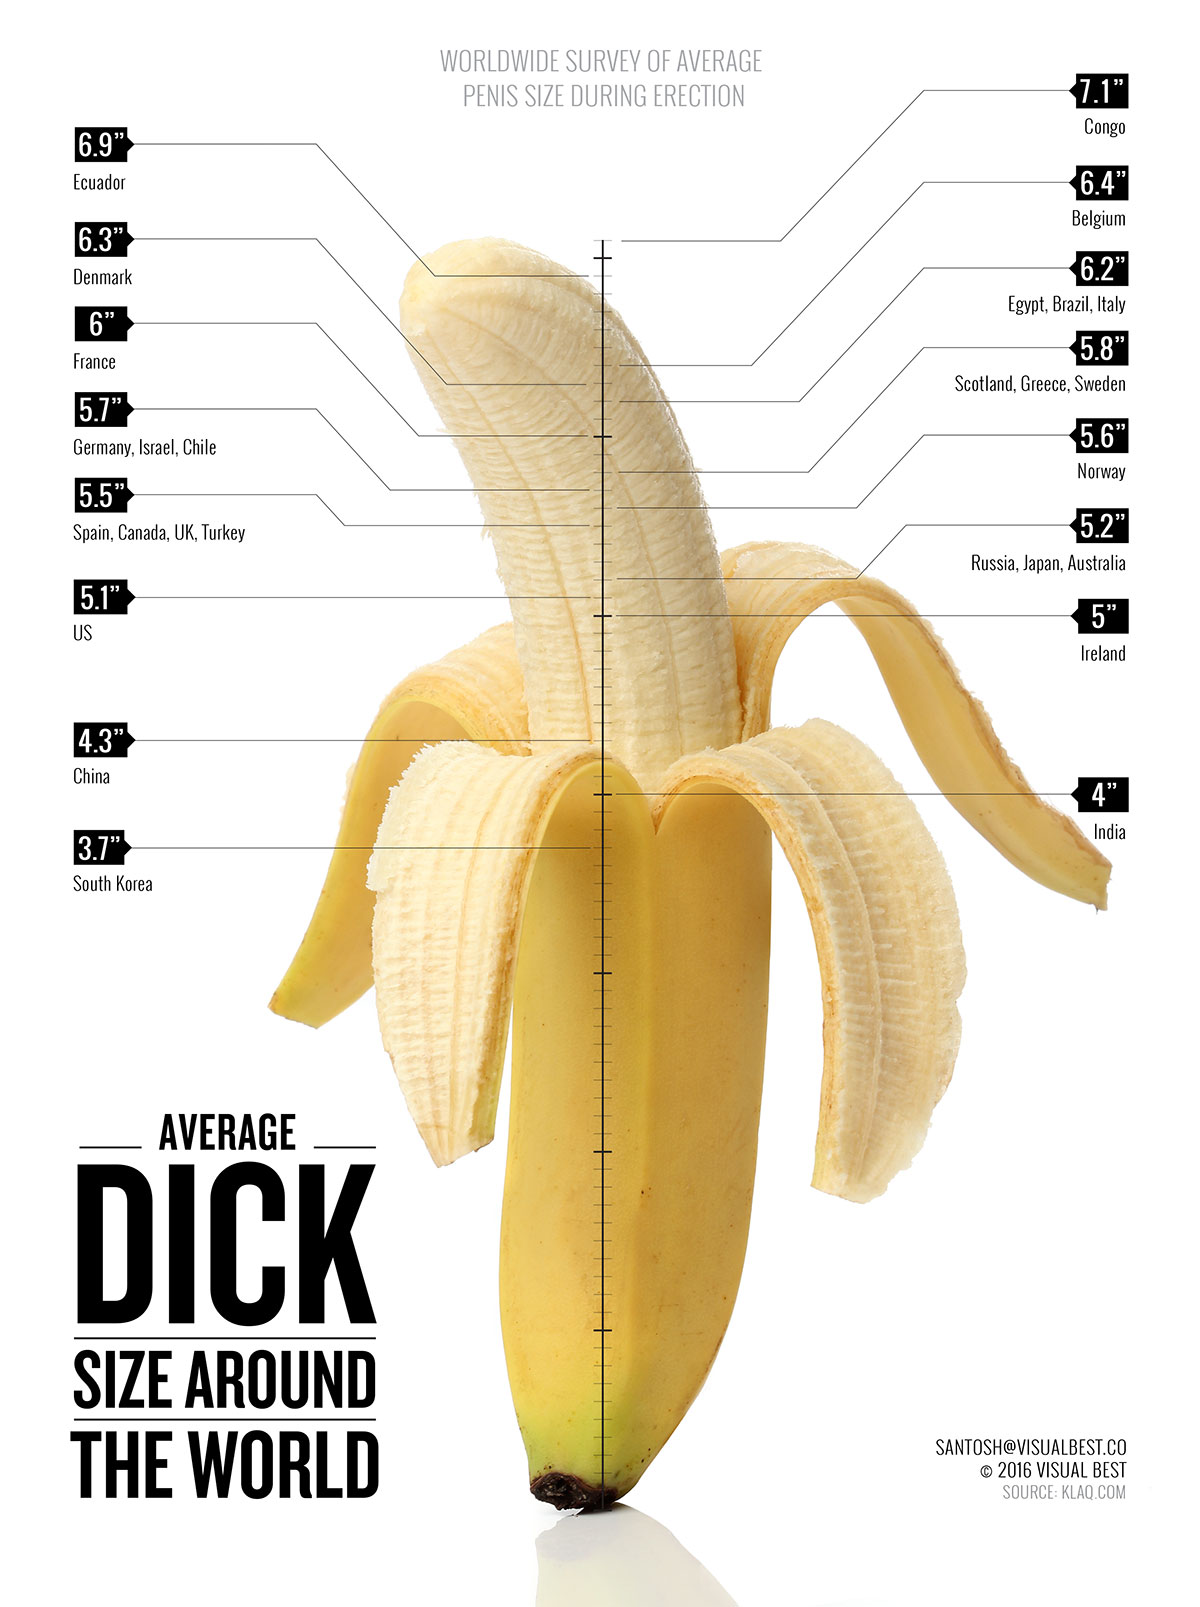 Dick size morocco